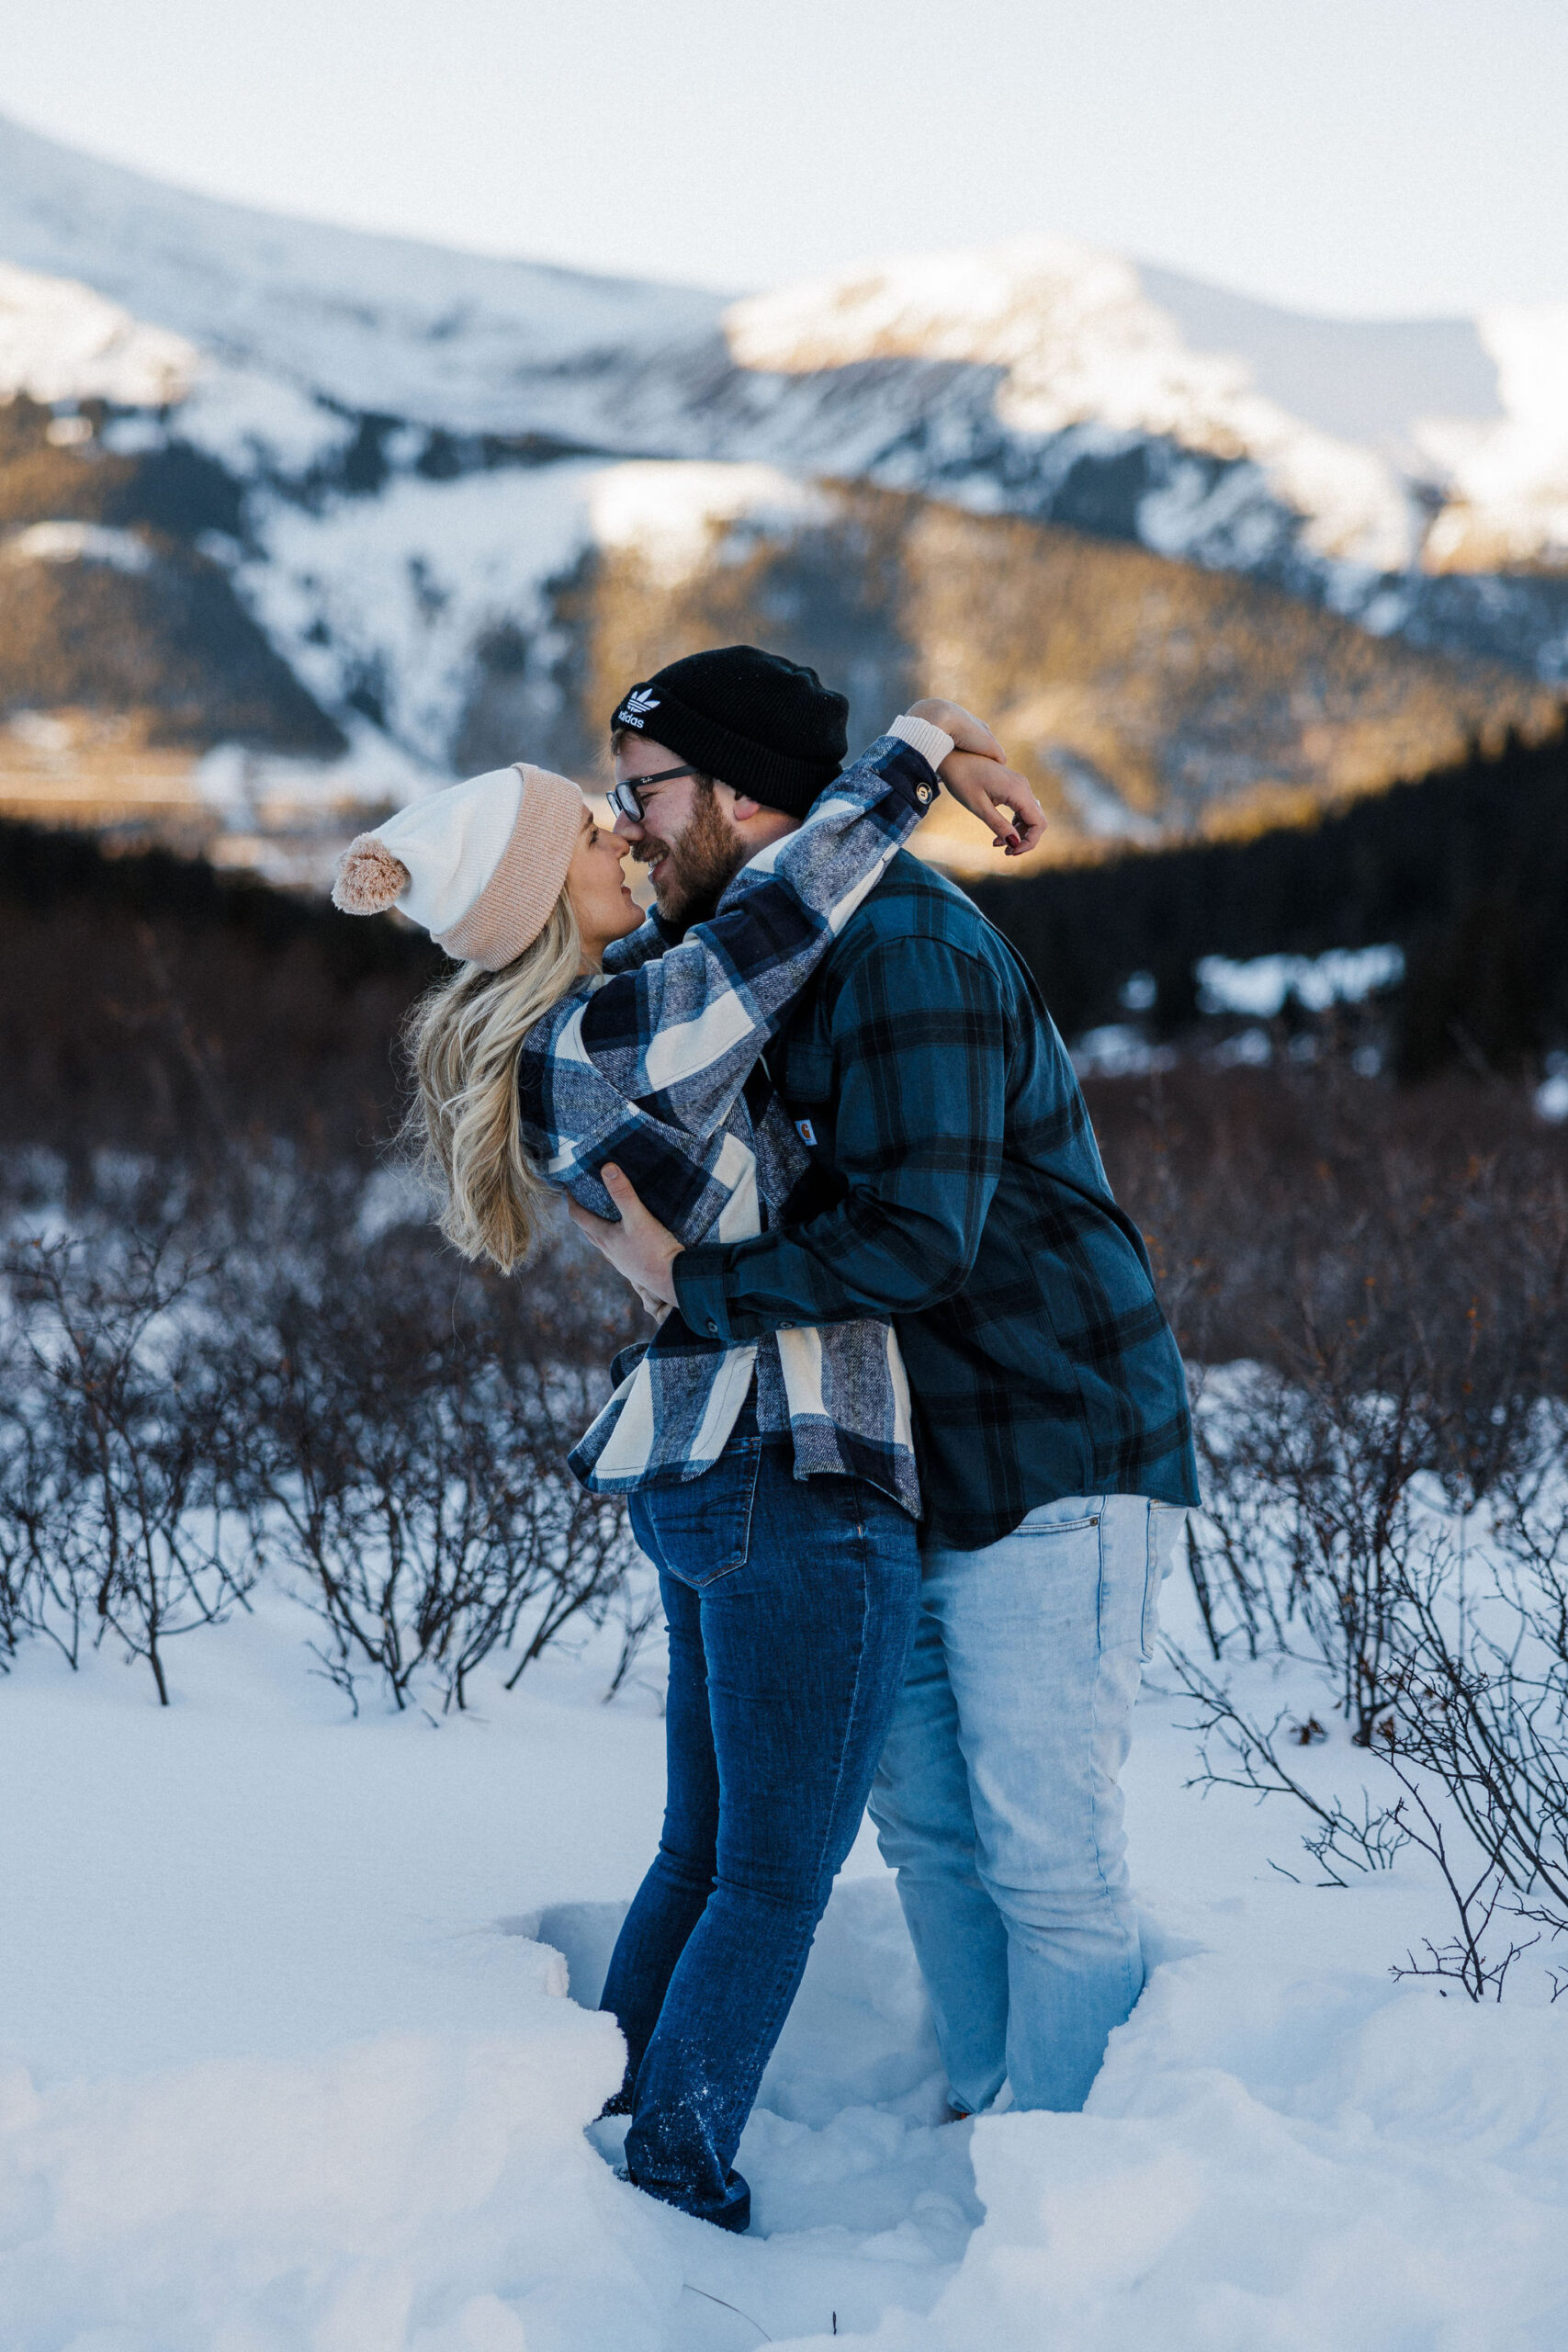 engaged couple embraces wuhile standing in the snow during winter engagement photo shoot.